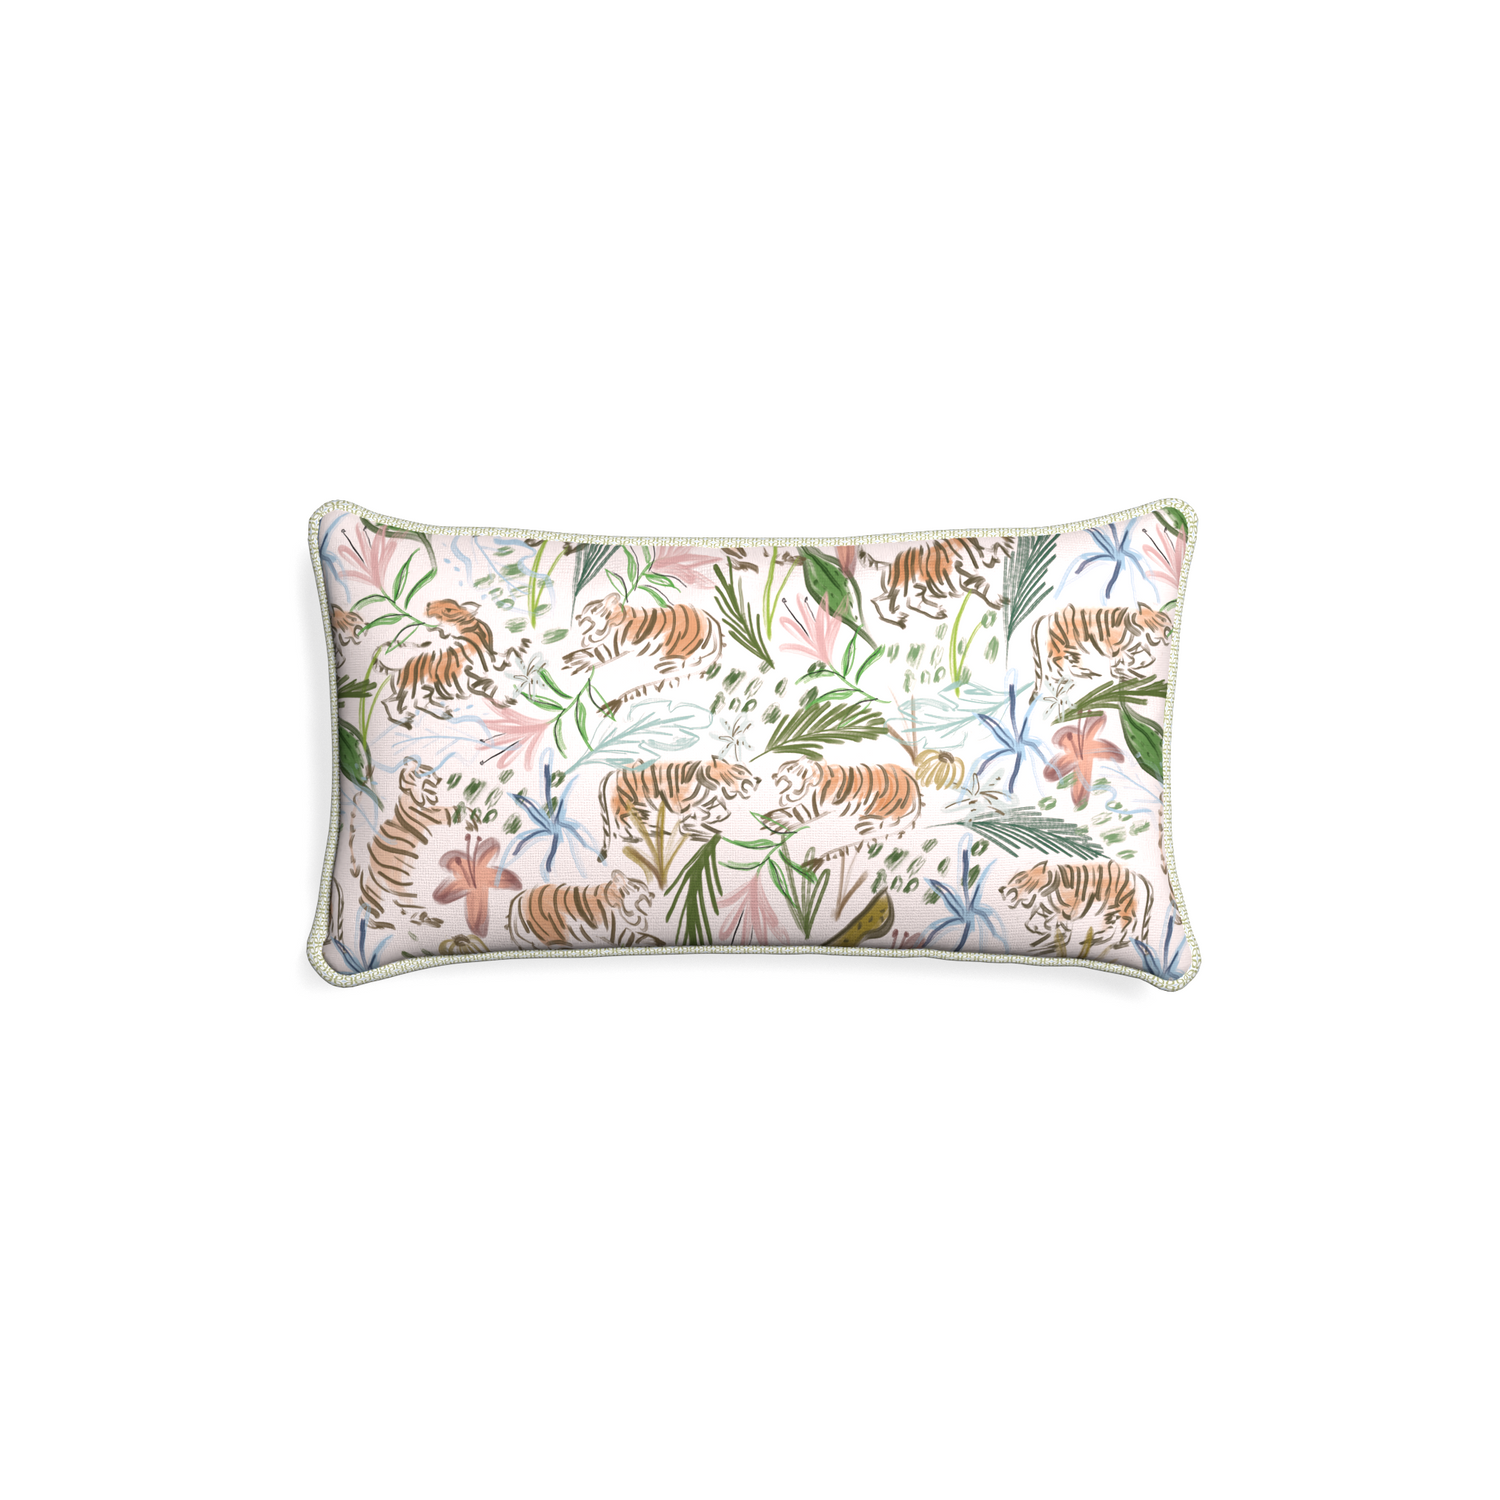 Petite-lumbar frida pink custom pink chinoiserie tigerpillow with l piping on white background